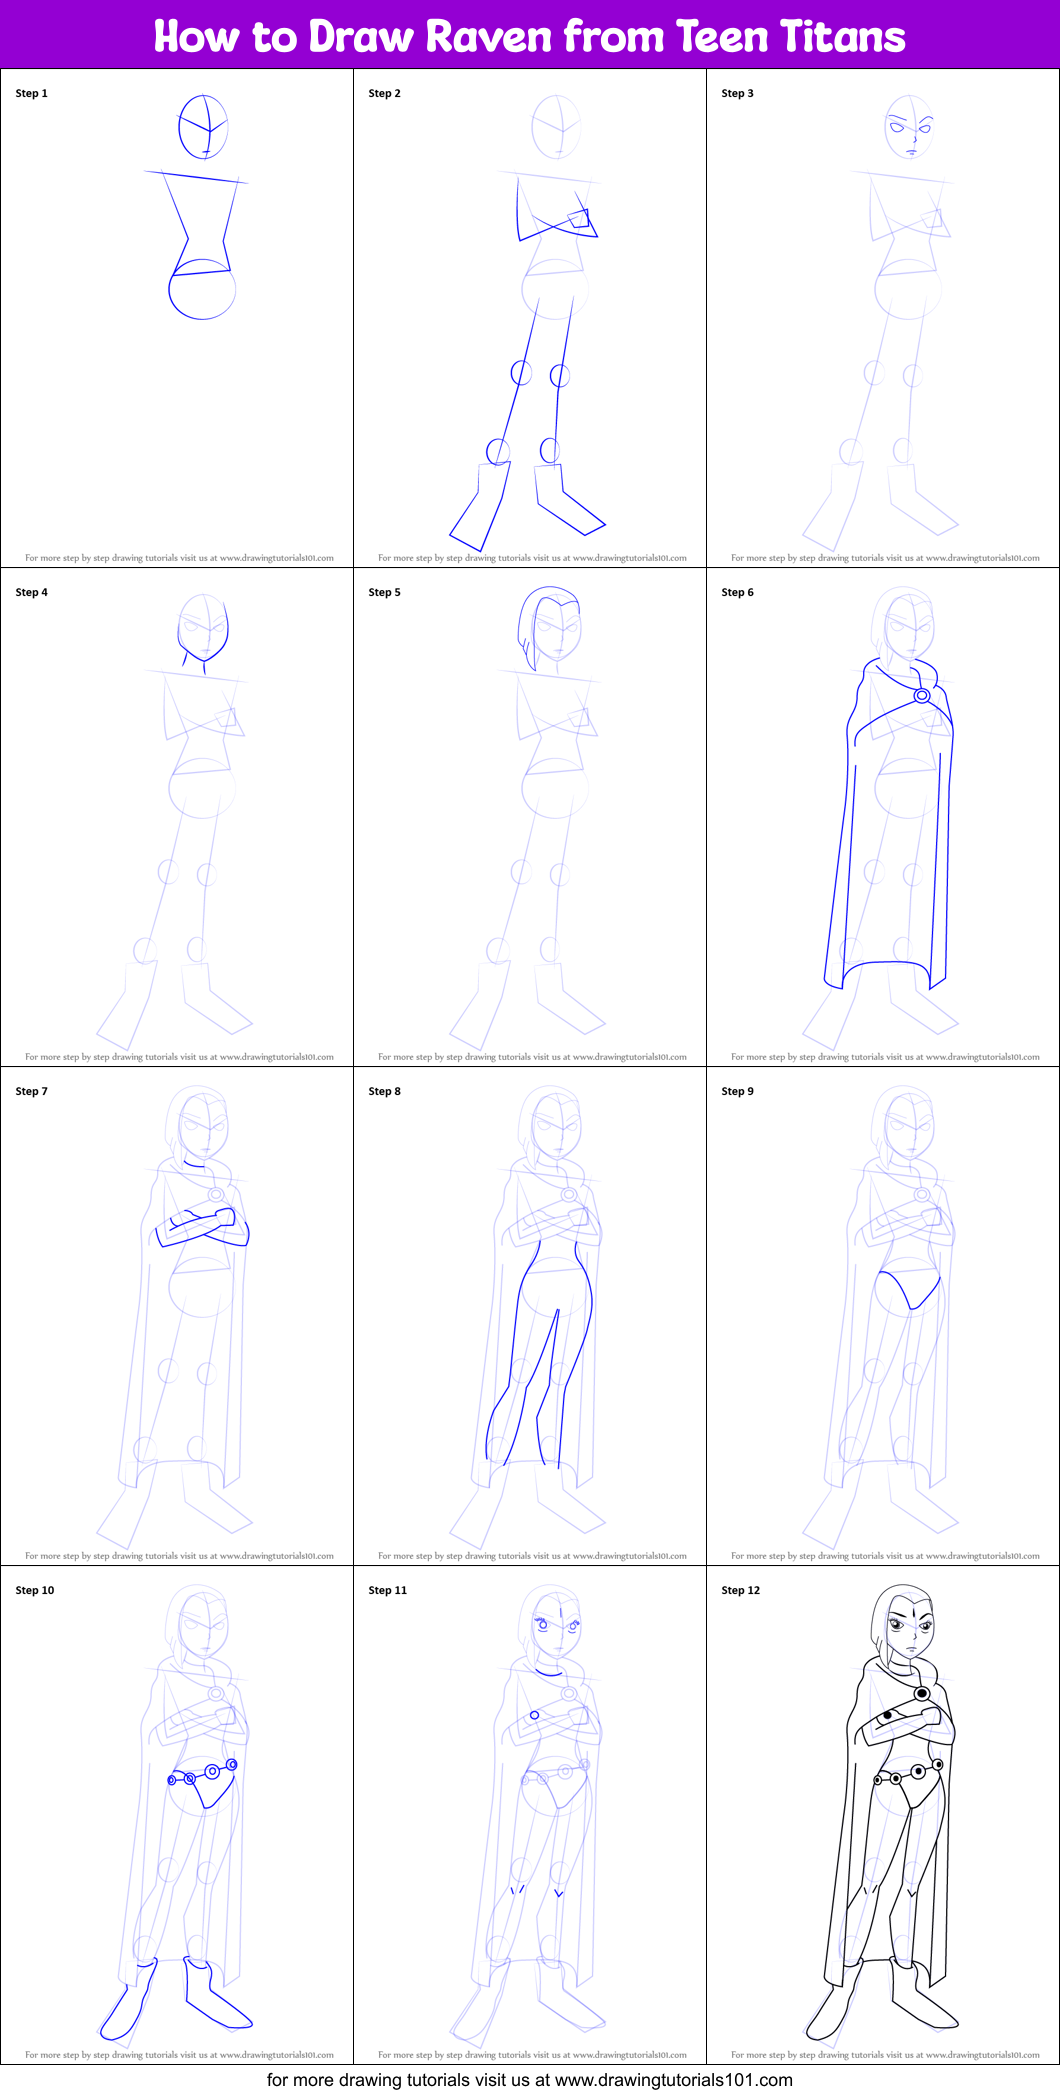 How to Draw Raven from Teen Titans printable step by step drawing sheet